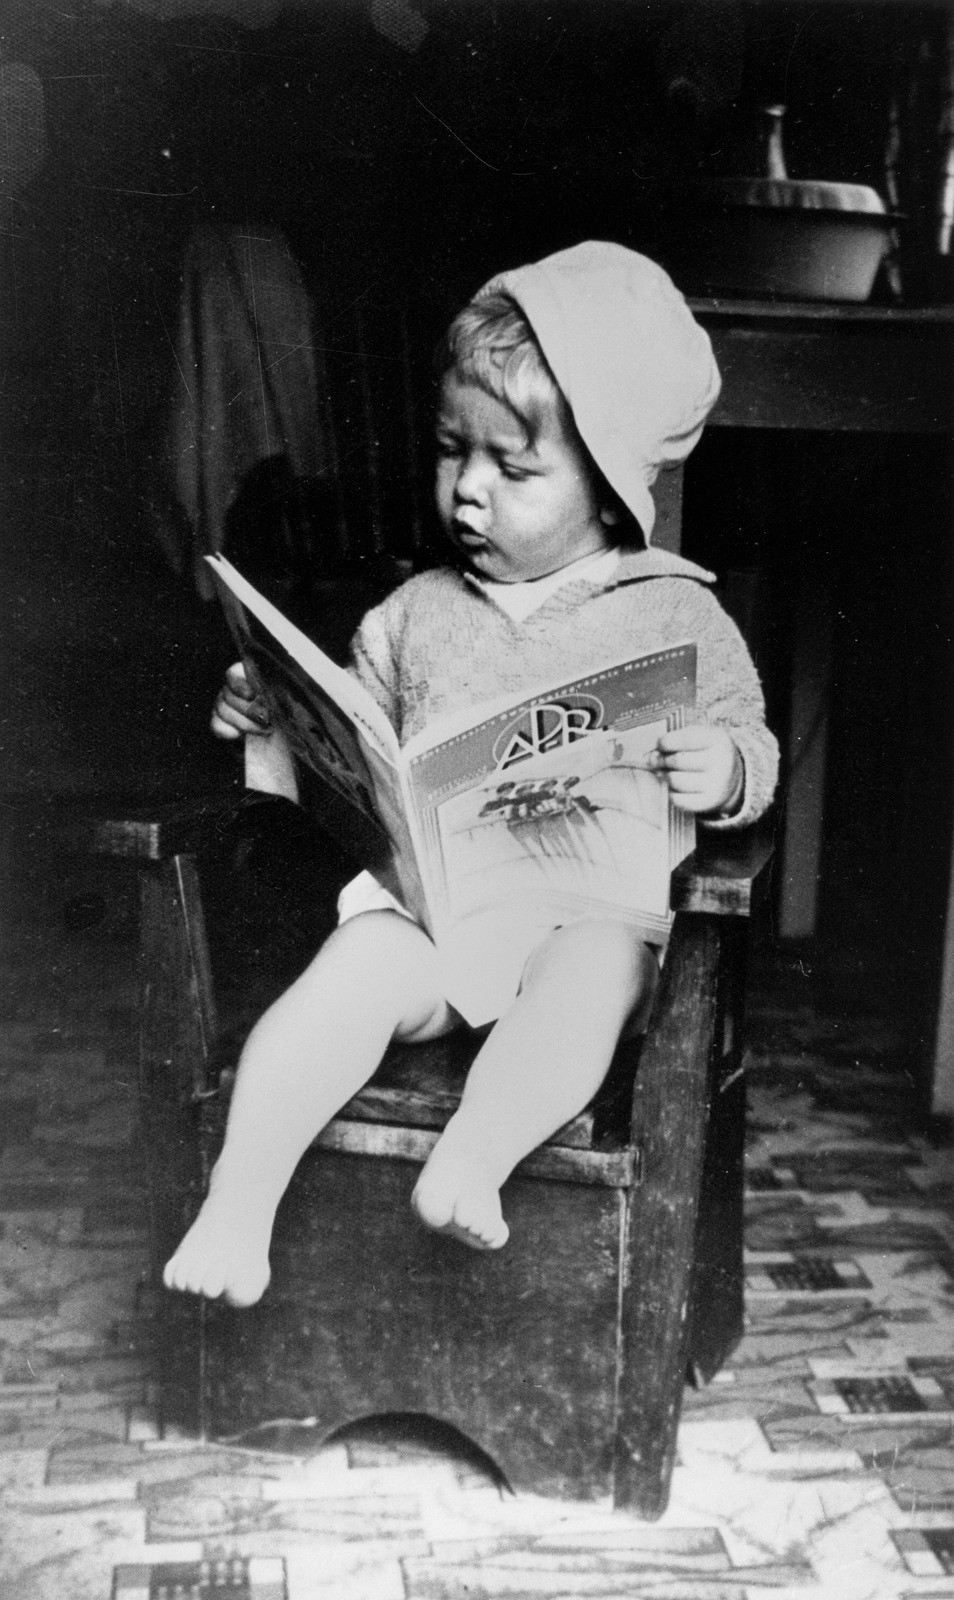 A picture of a small child sitting on a seat reading